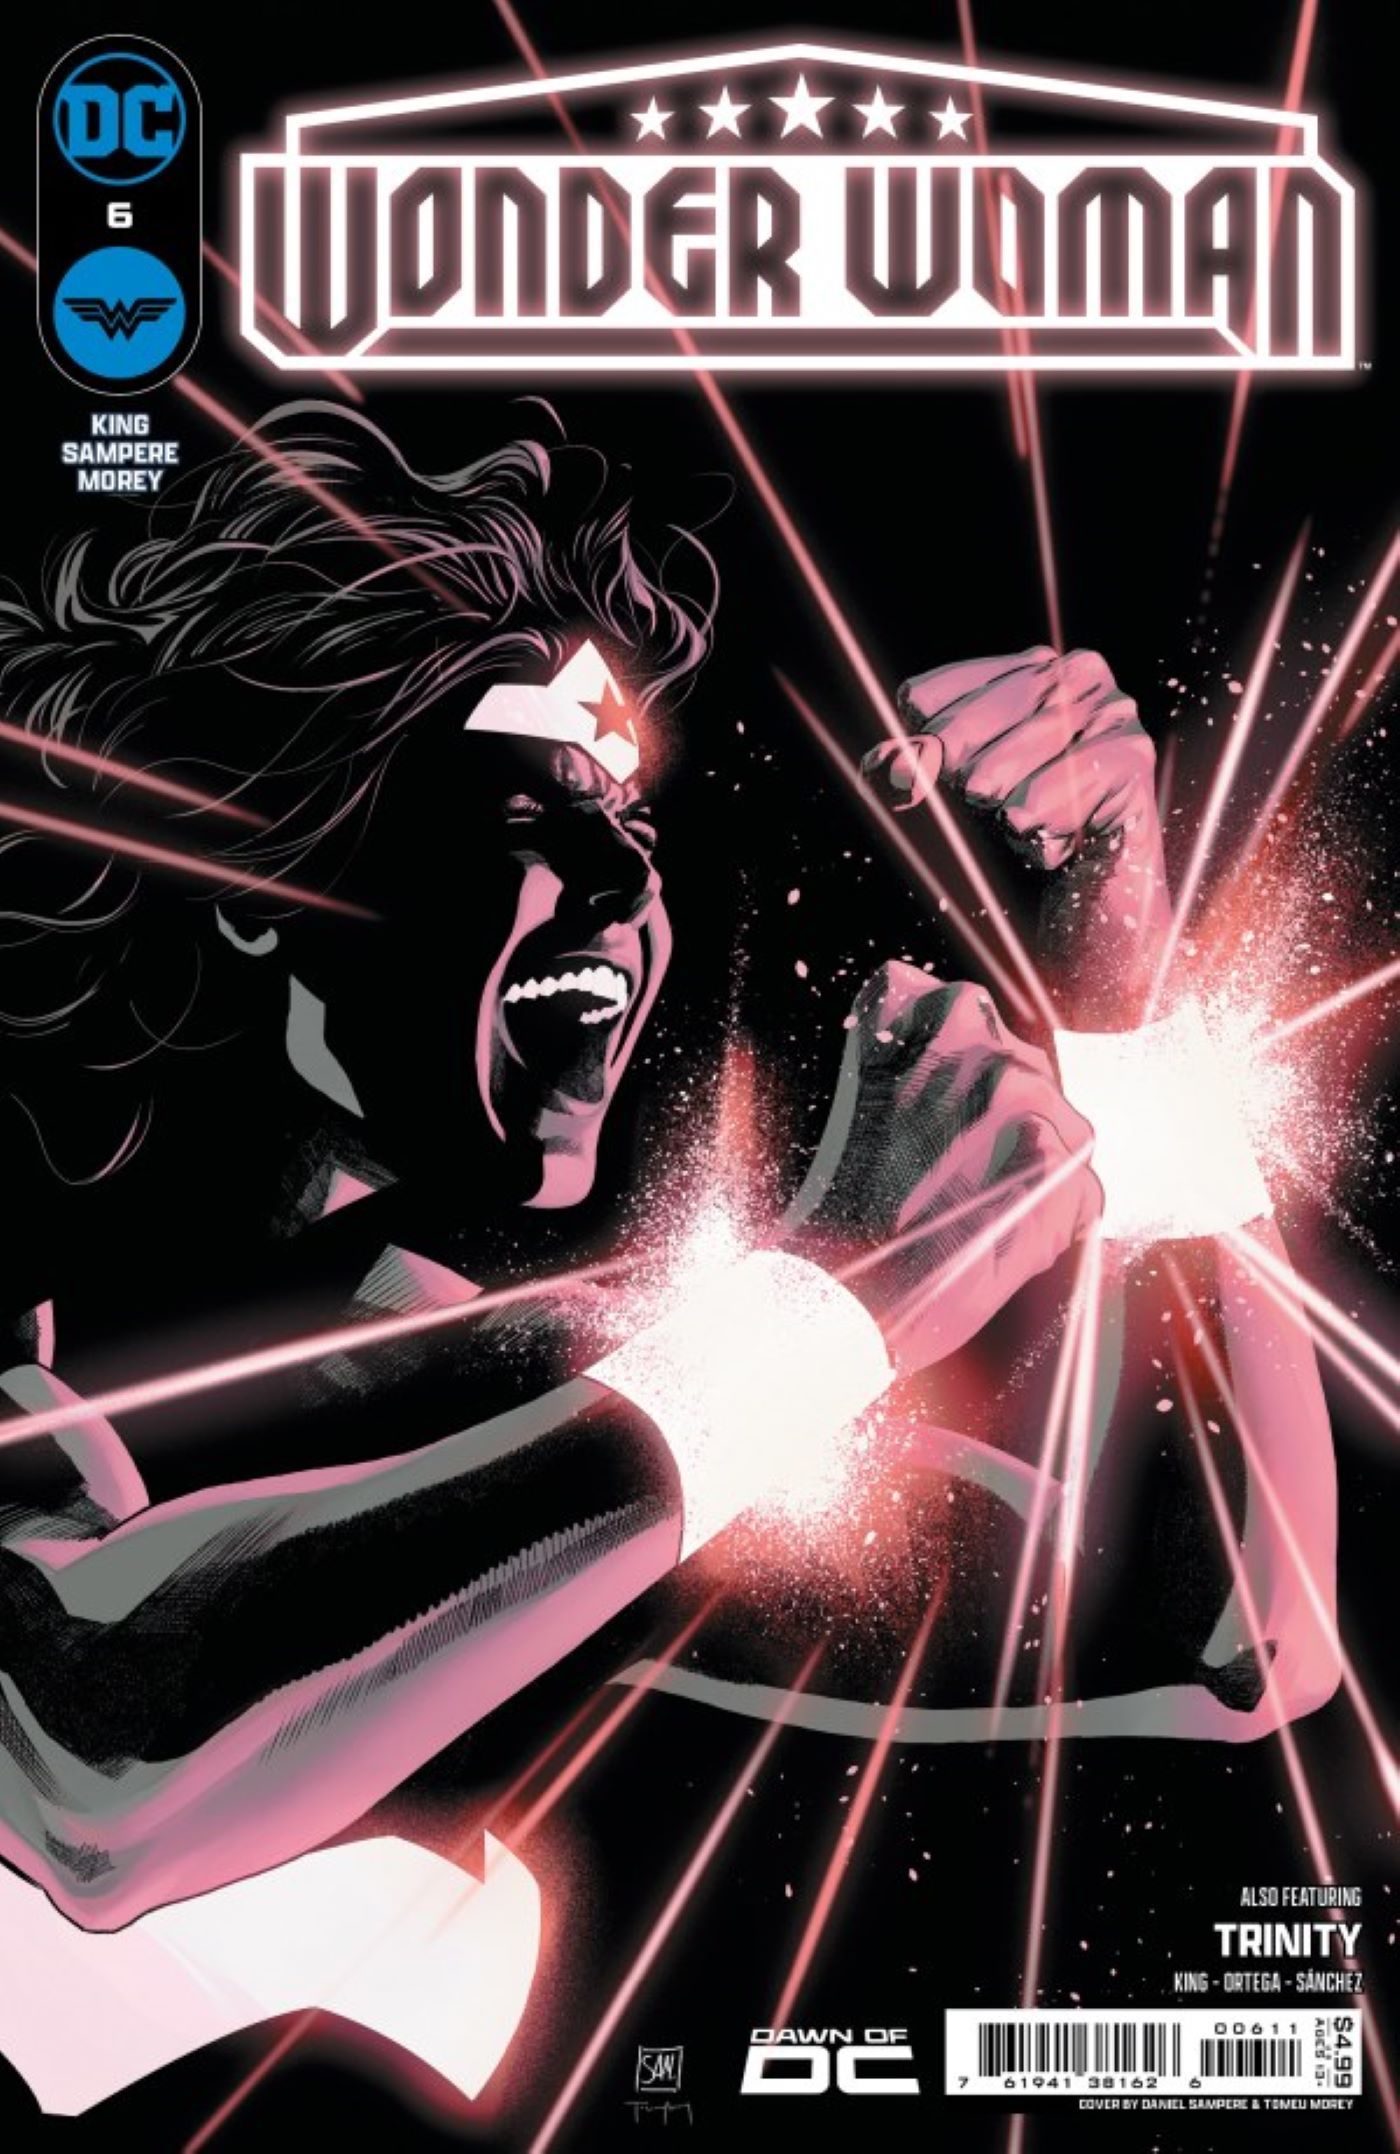 Wonder Woman #6 cover featuring Diana screaming bellowing comic cover